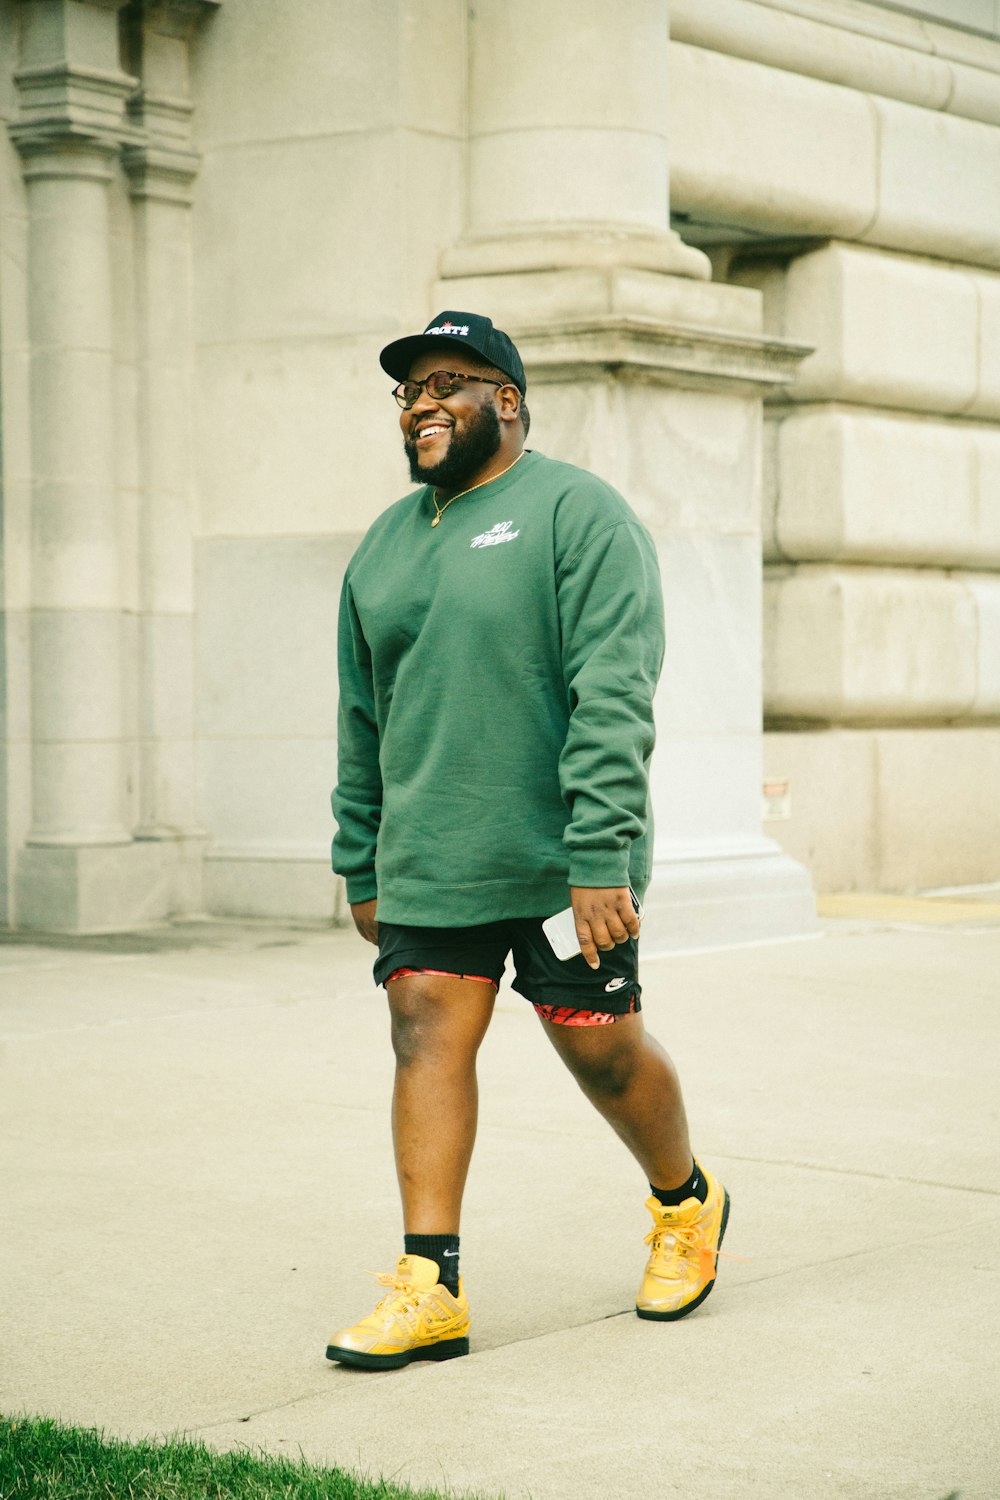 Man in green sweater and black shorts running on road during daytime photo  – Free Mi Image on Unsplash